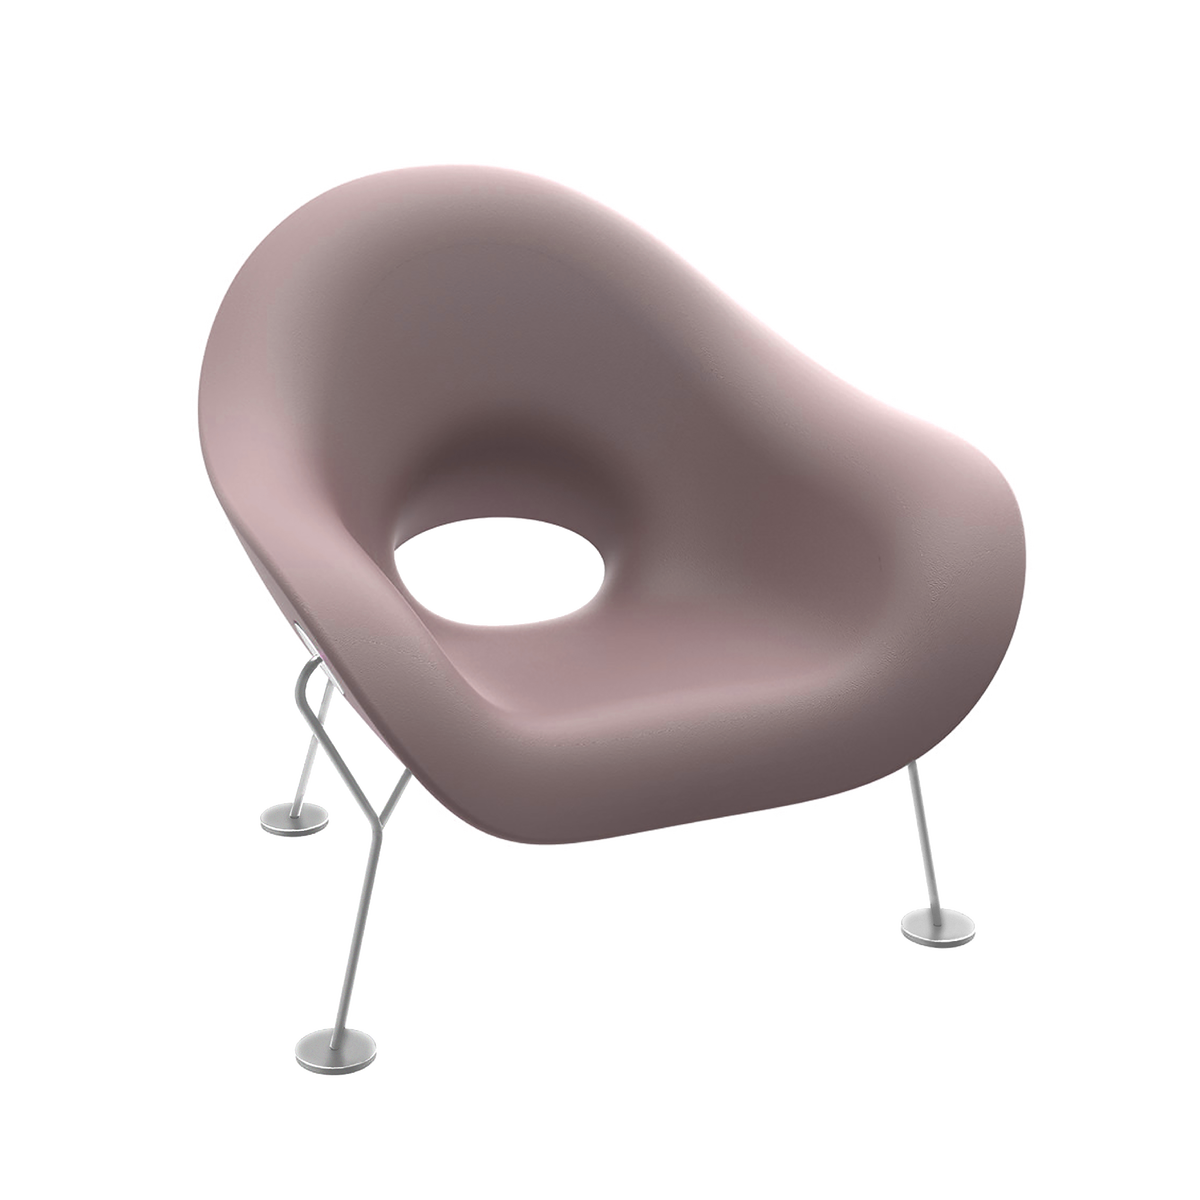 The pupa armchair is an uncontrollable and light chair with a chrome frame, suitable for external environments. Designed by Andrea Branzi, it is based on a light metal frame, leaving volume floating in space and emphasizing its sensual elegance.